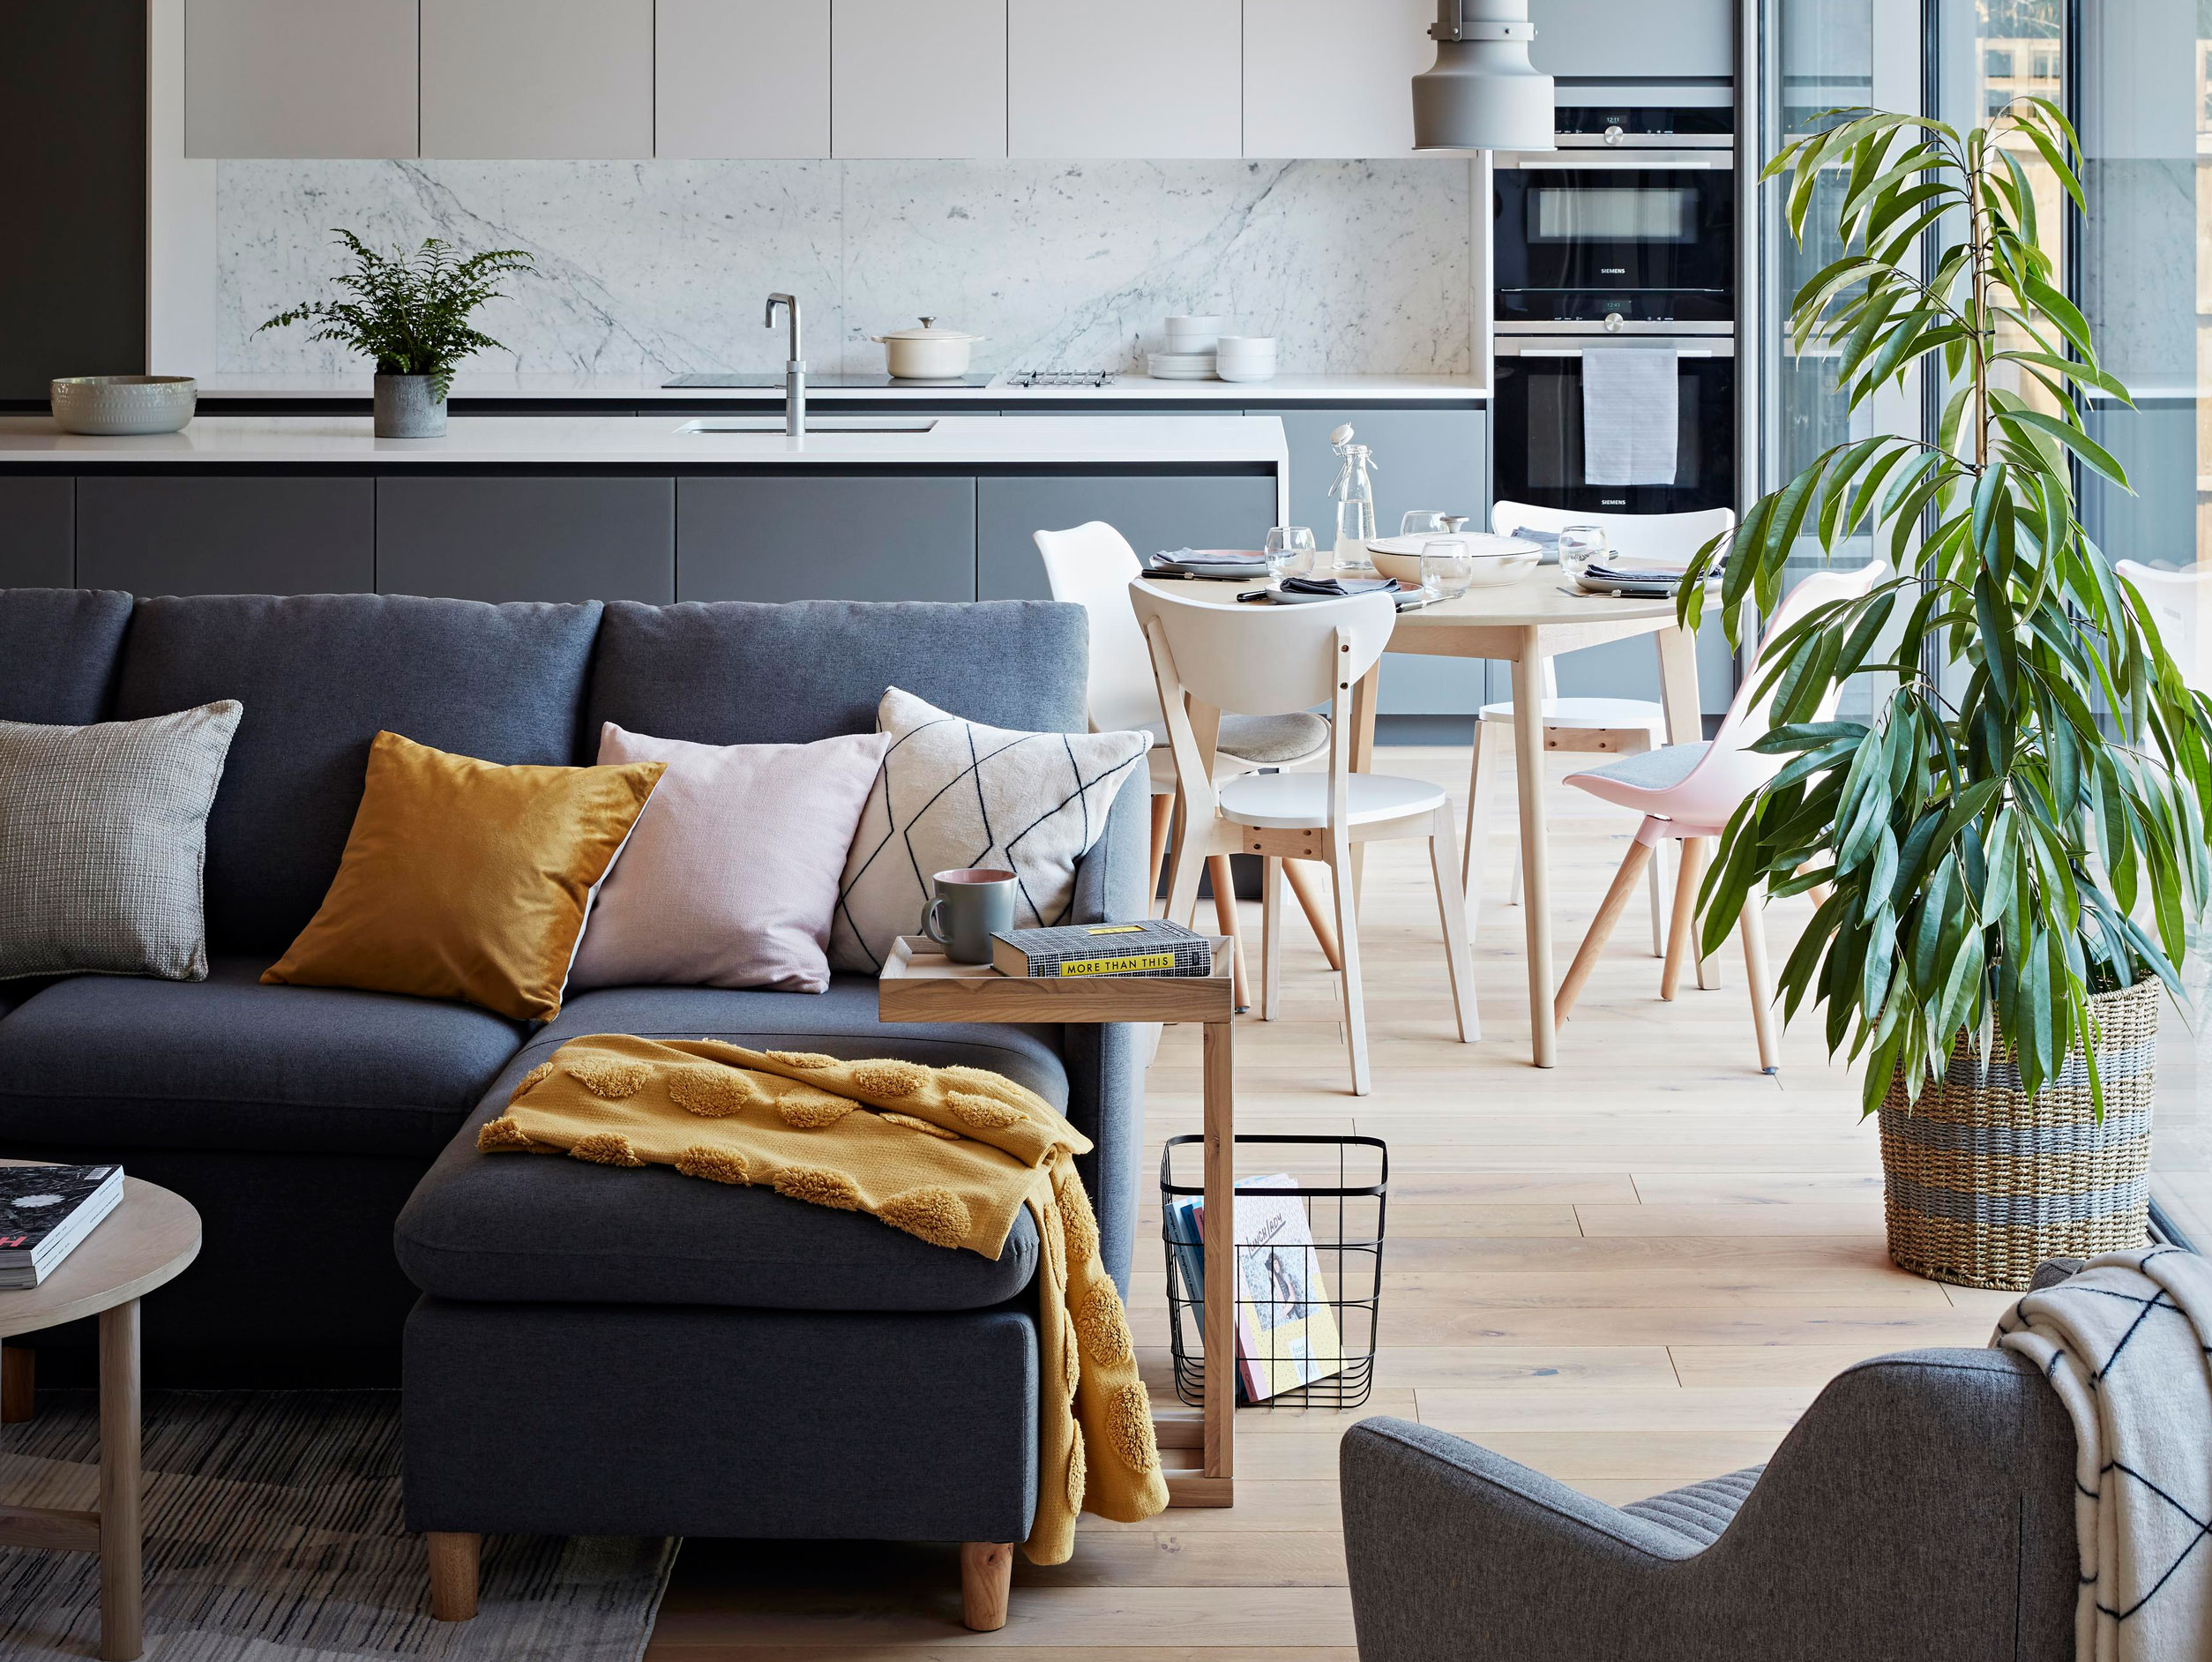 5 Easy Danish Interior Design Looks You A Will Love B Want To Copy